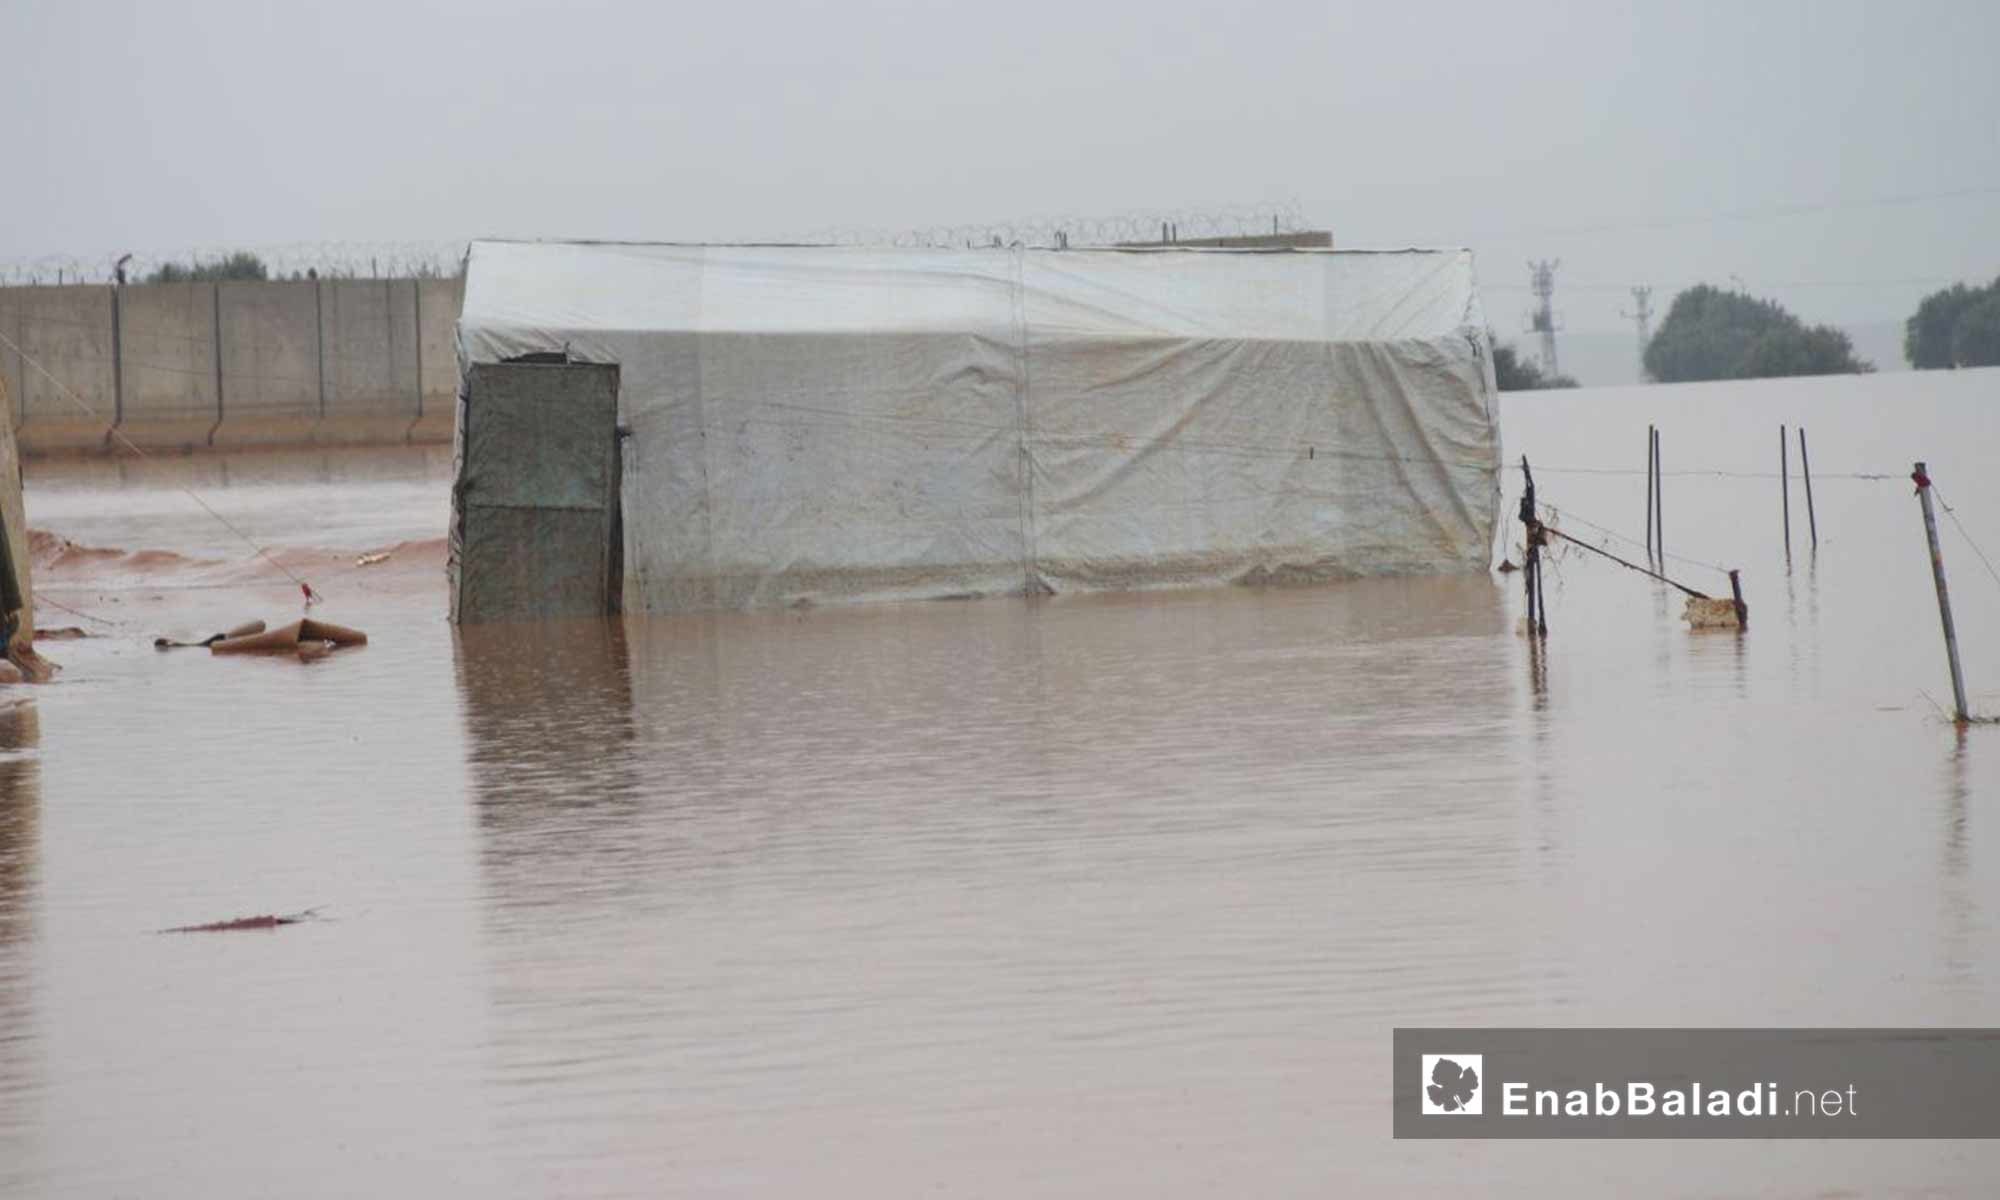 Deluges caused by the massive rains drown the camps of internally displaced people in northern Idlib – March 31, 2019 (Enab Baladi)